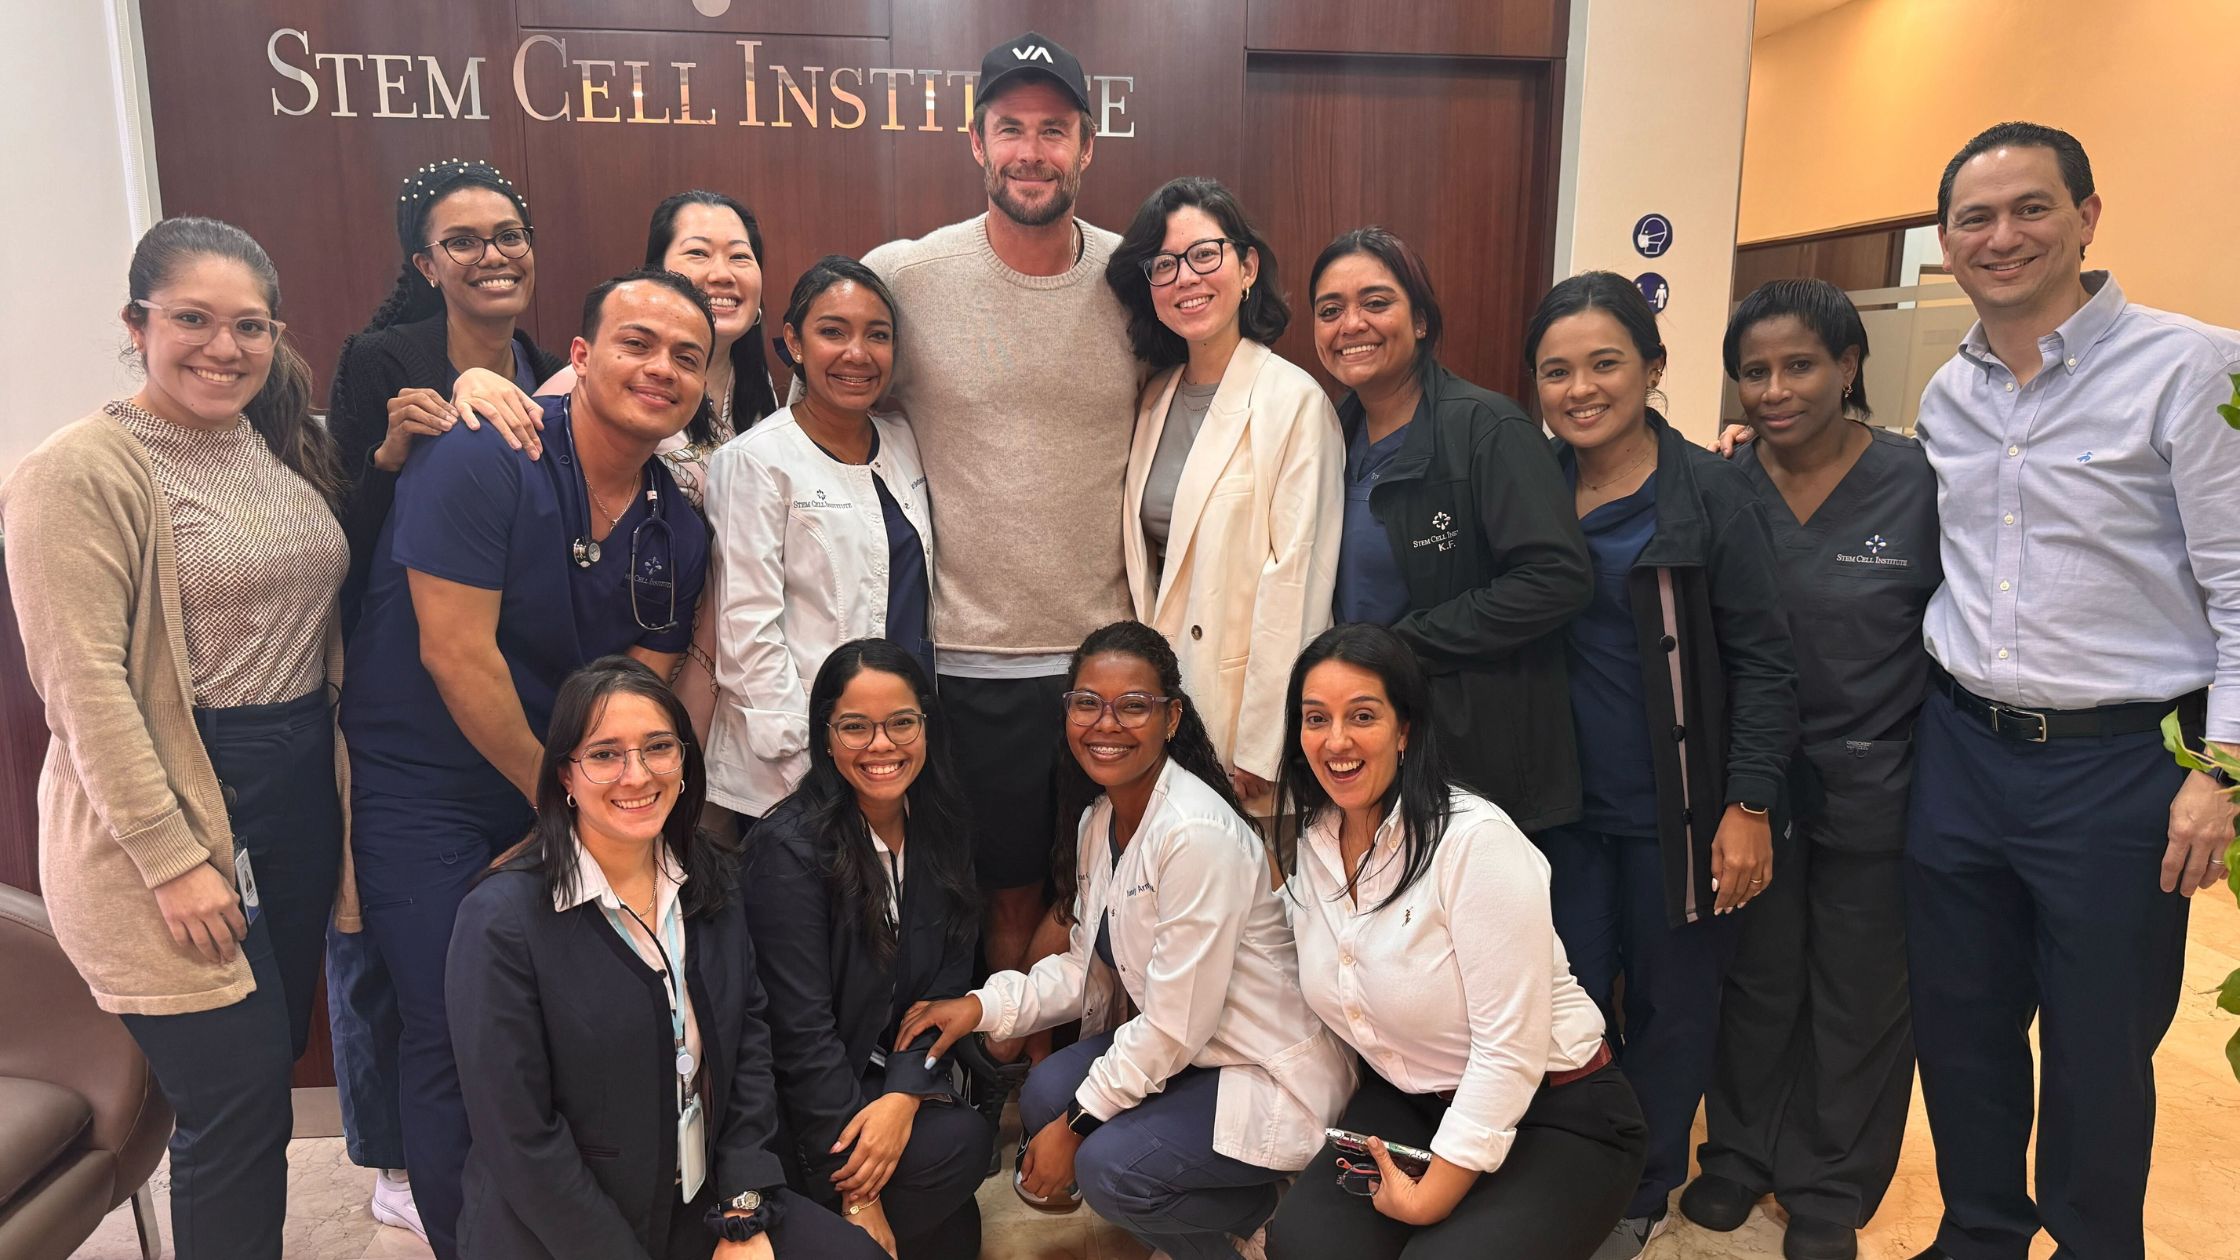 Chris Hemsworth Poses with Team at Stem Cell Institute in Panama